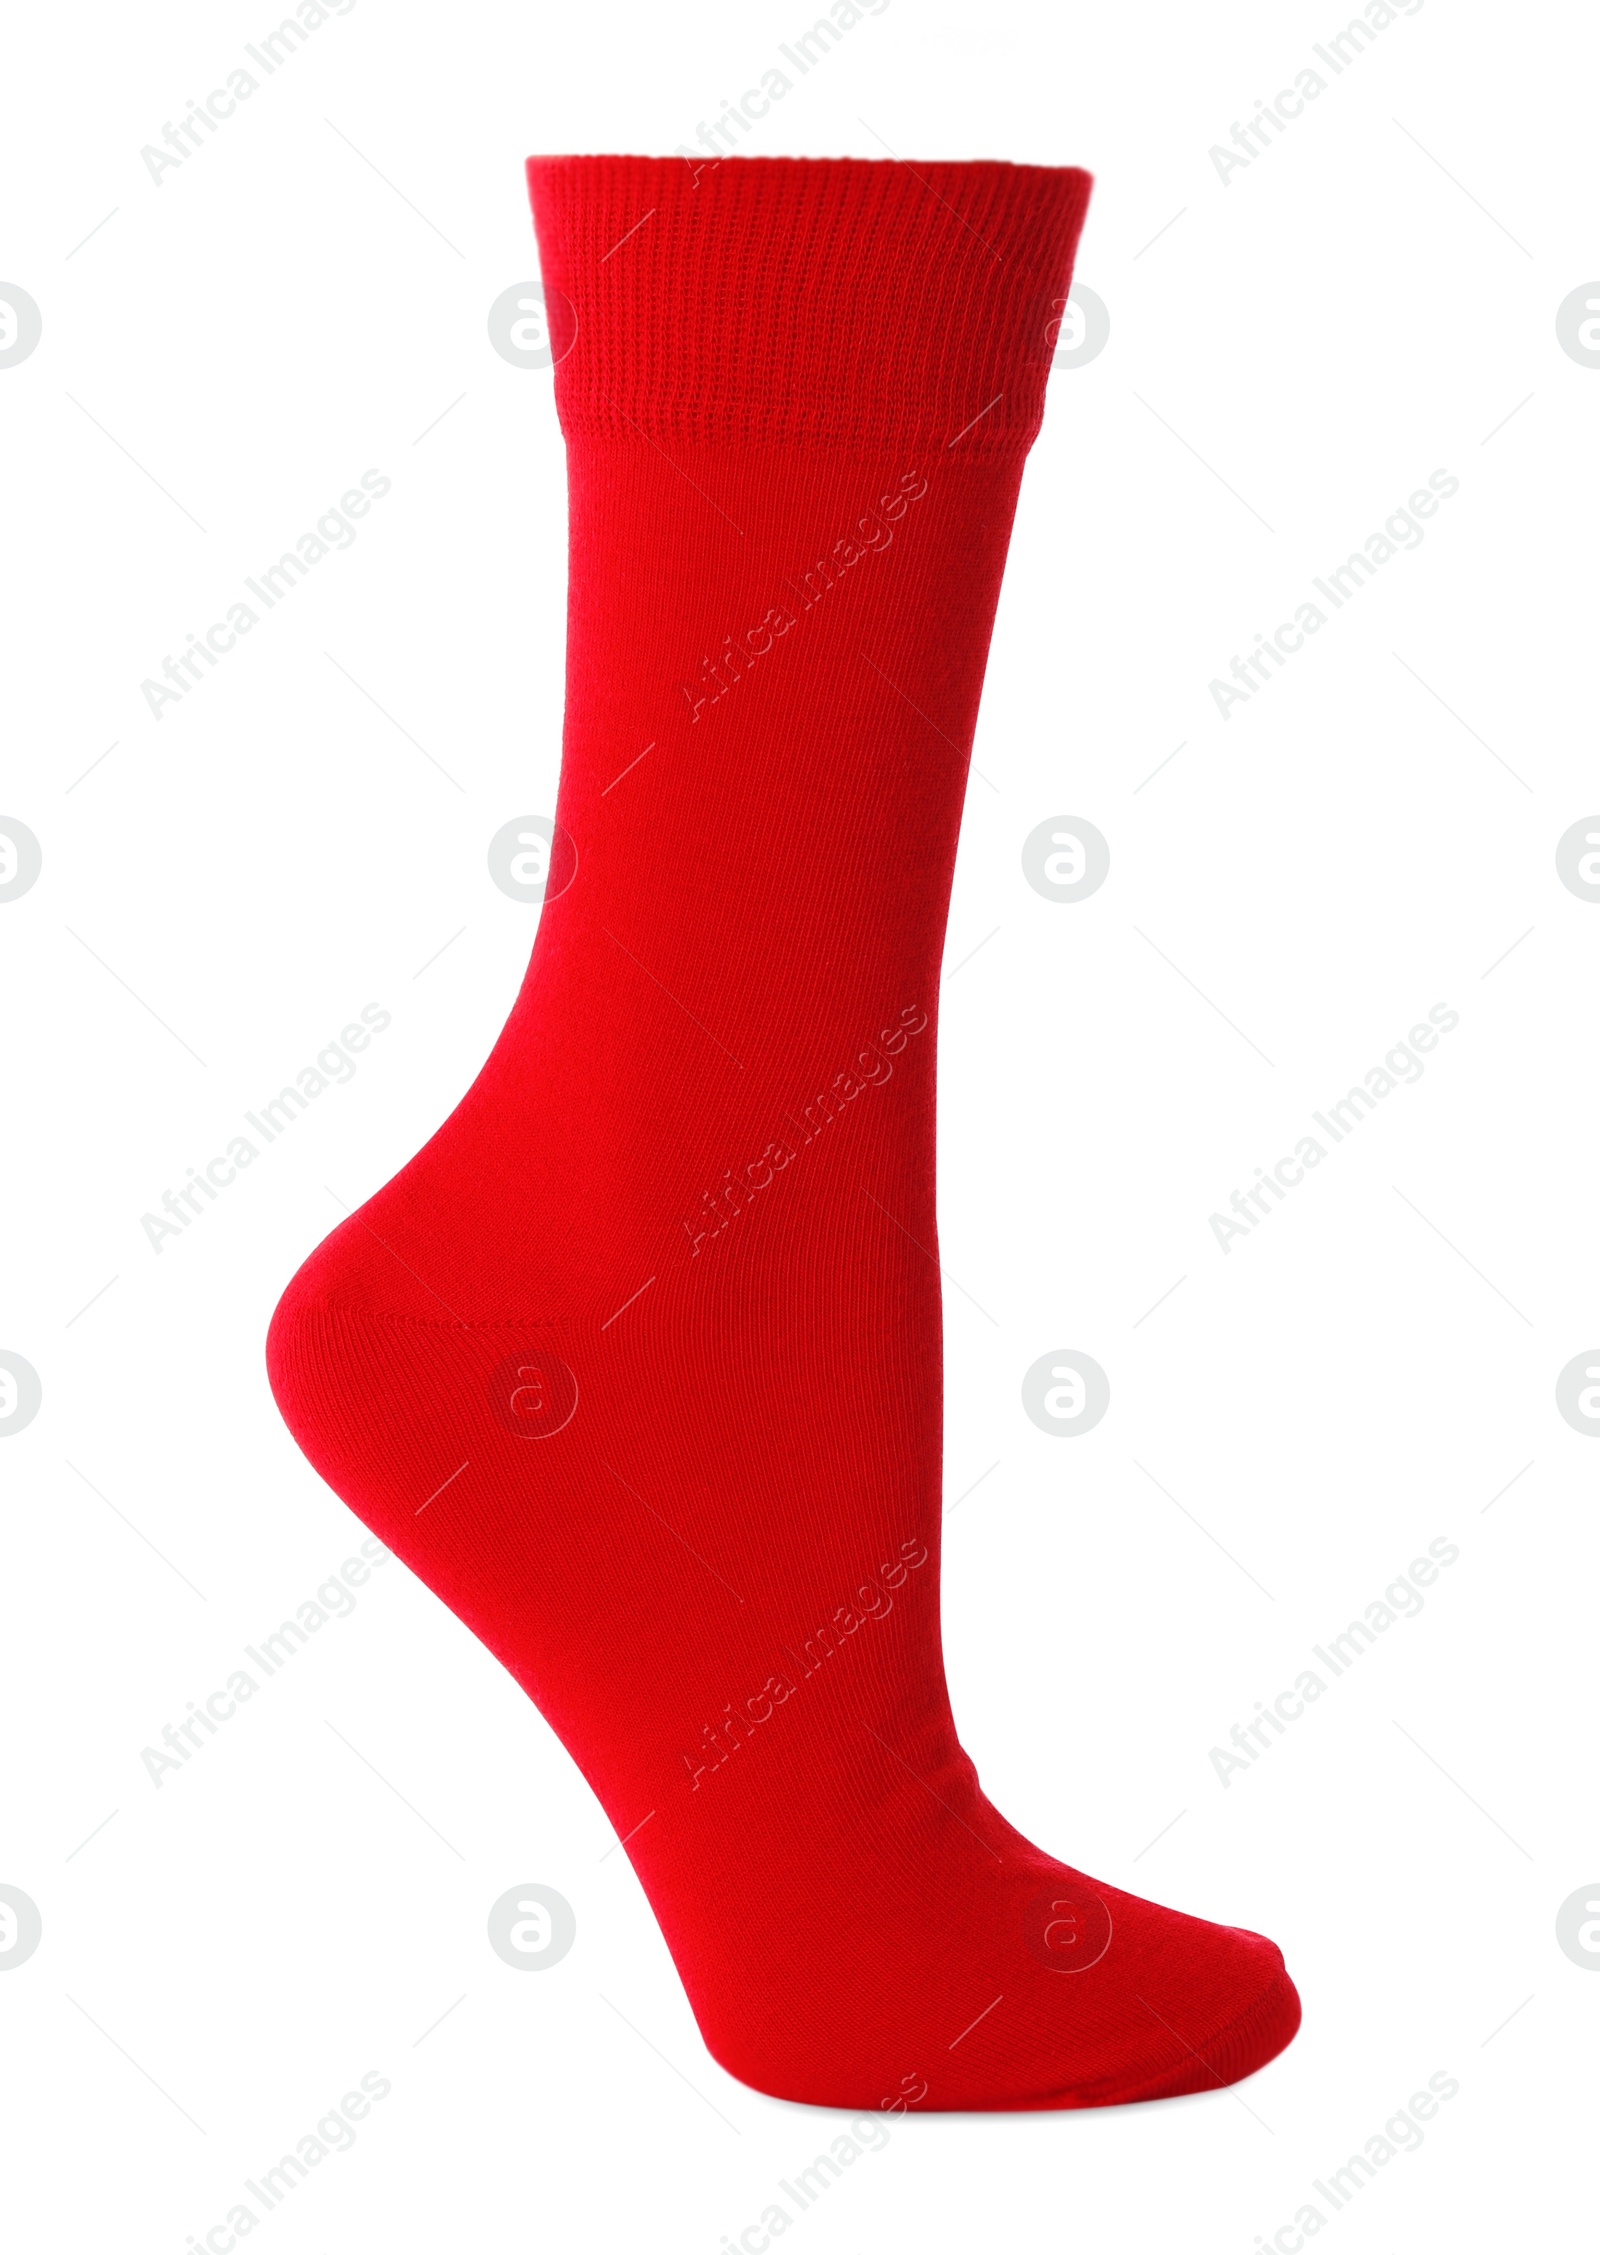 Photo of One new red sock isolated on white